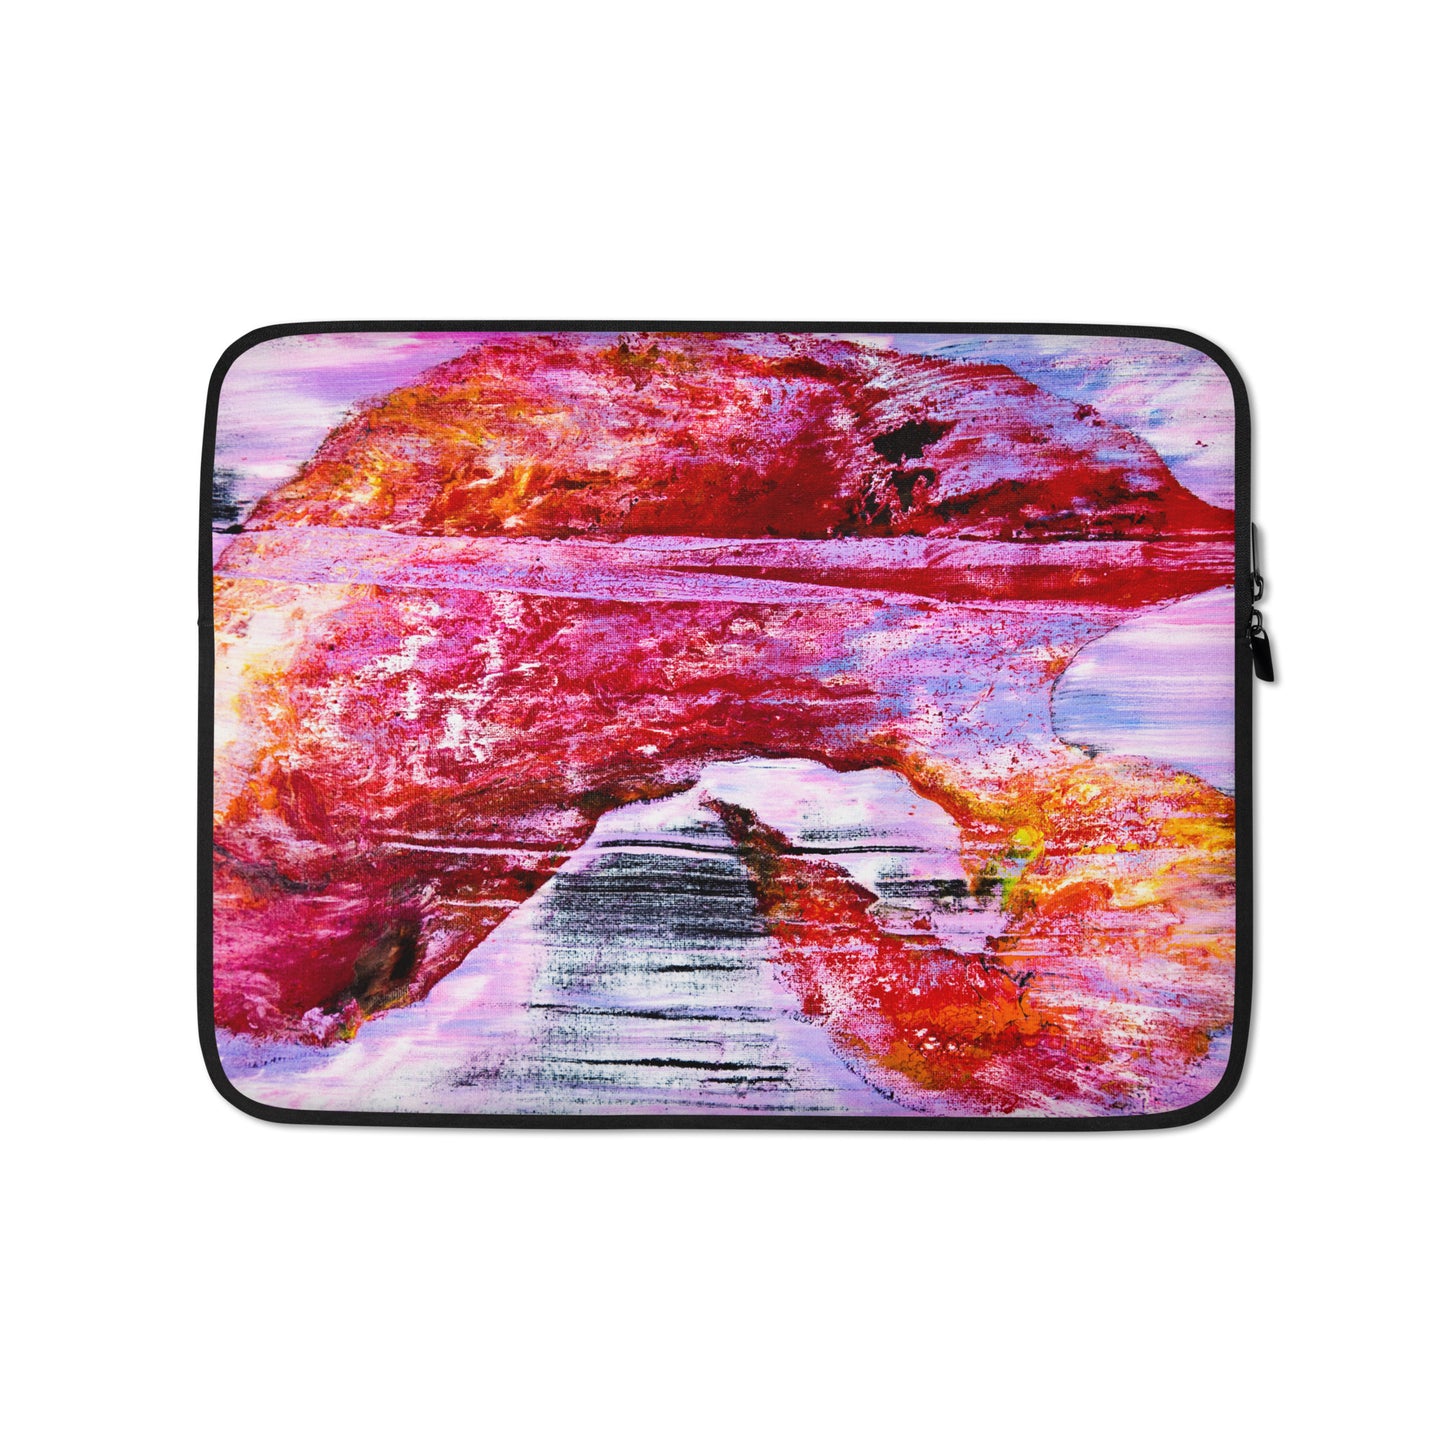 NightOwl Studio Padded Laptop Sleeve with Faux Fur Lining, 13 and 15 Inch Covers for Portable Computers and Large Tablets, Slim and Portable Neoprene for Work, Travel, or Gaming, Pink Rain